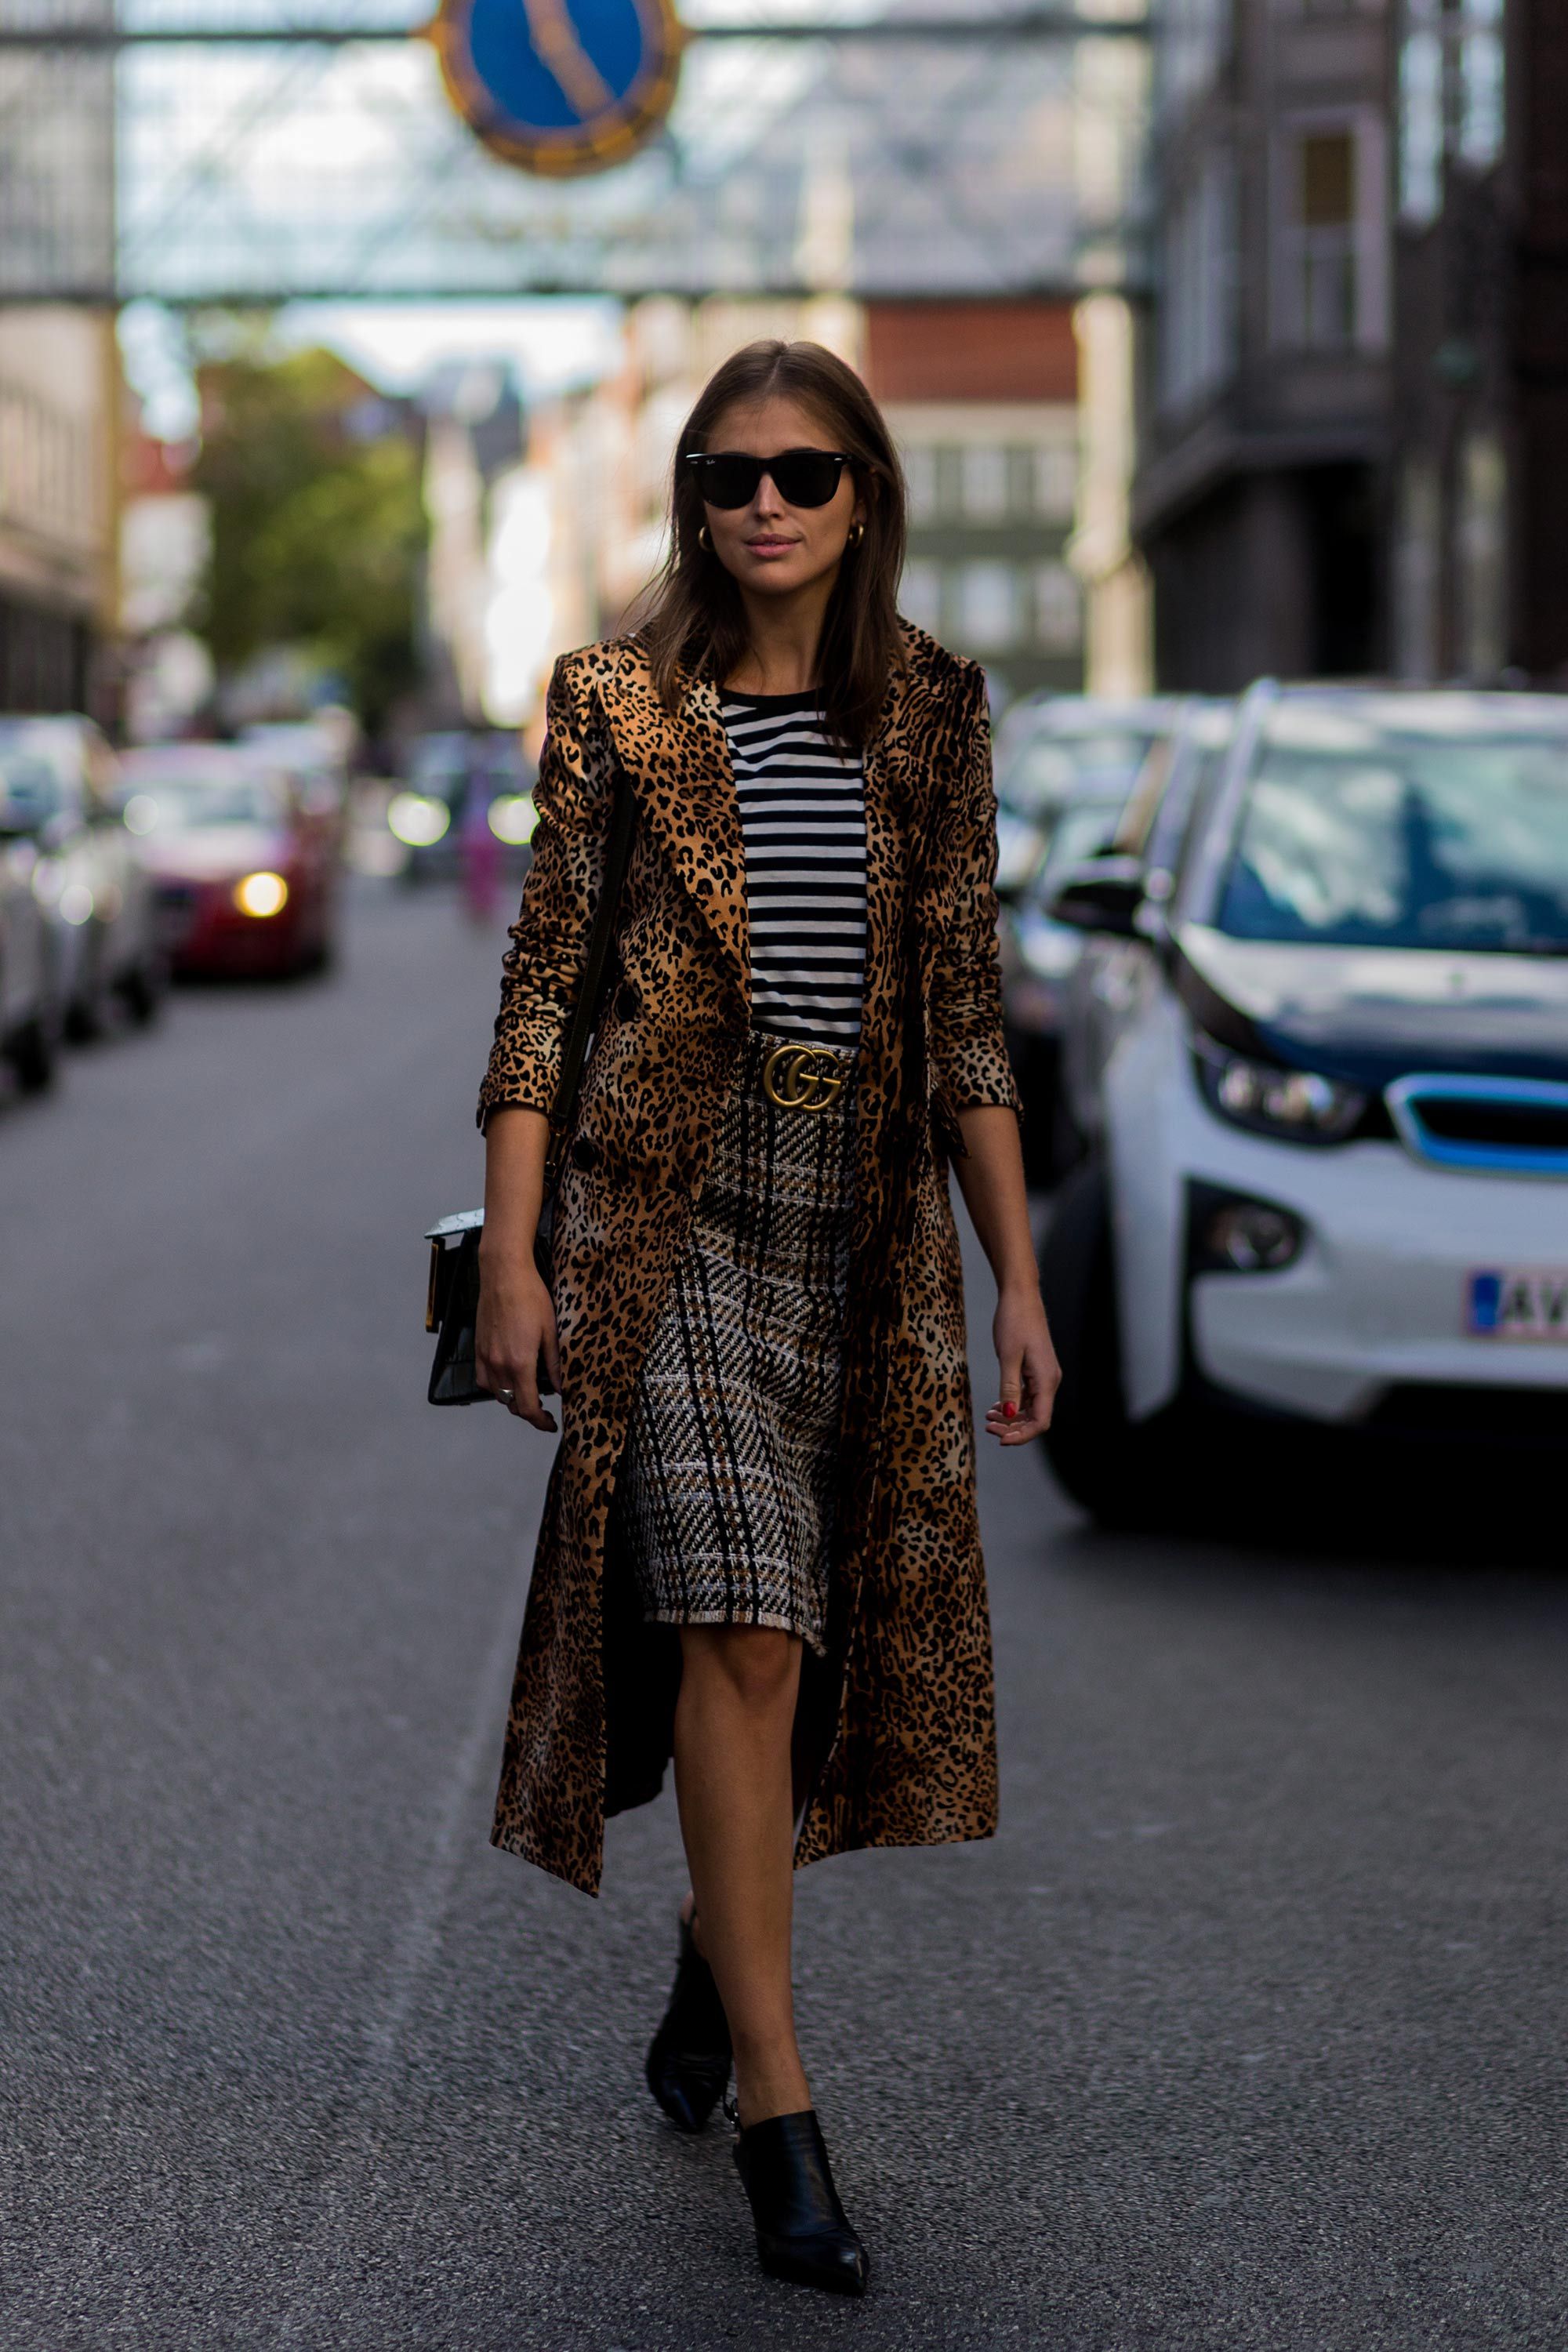 Leopard print fashion trend - style outfit inspiration